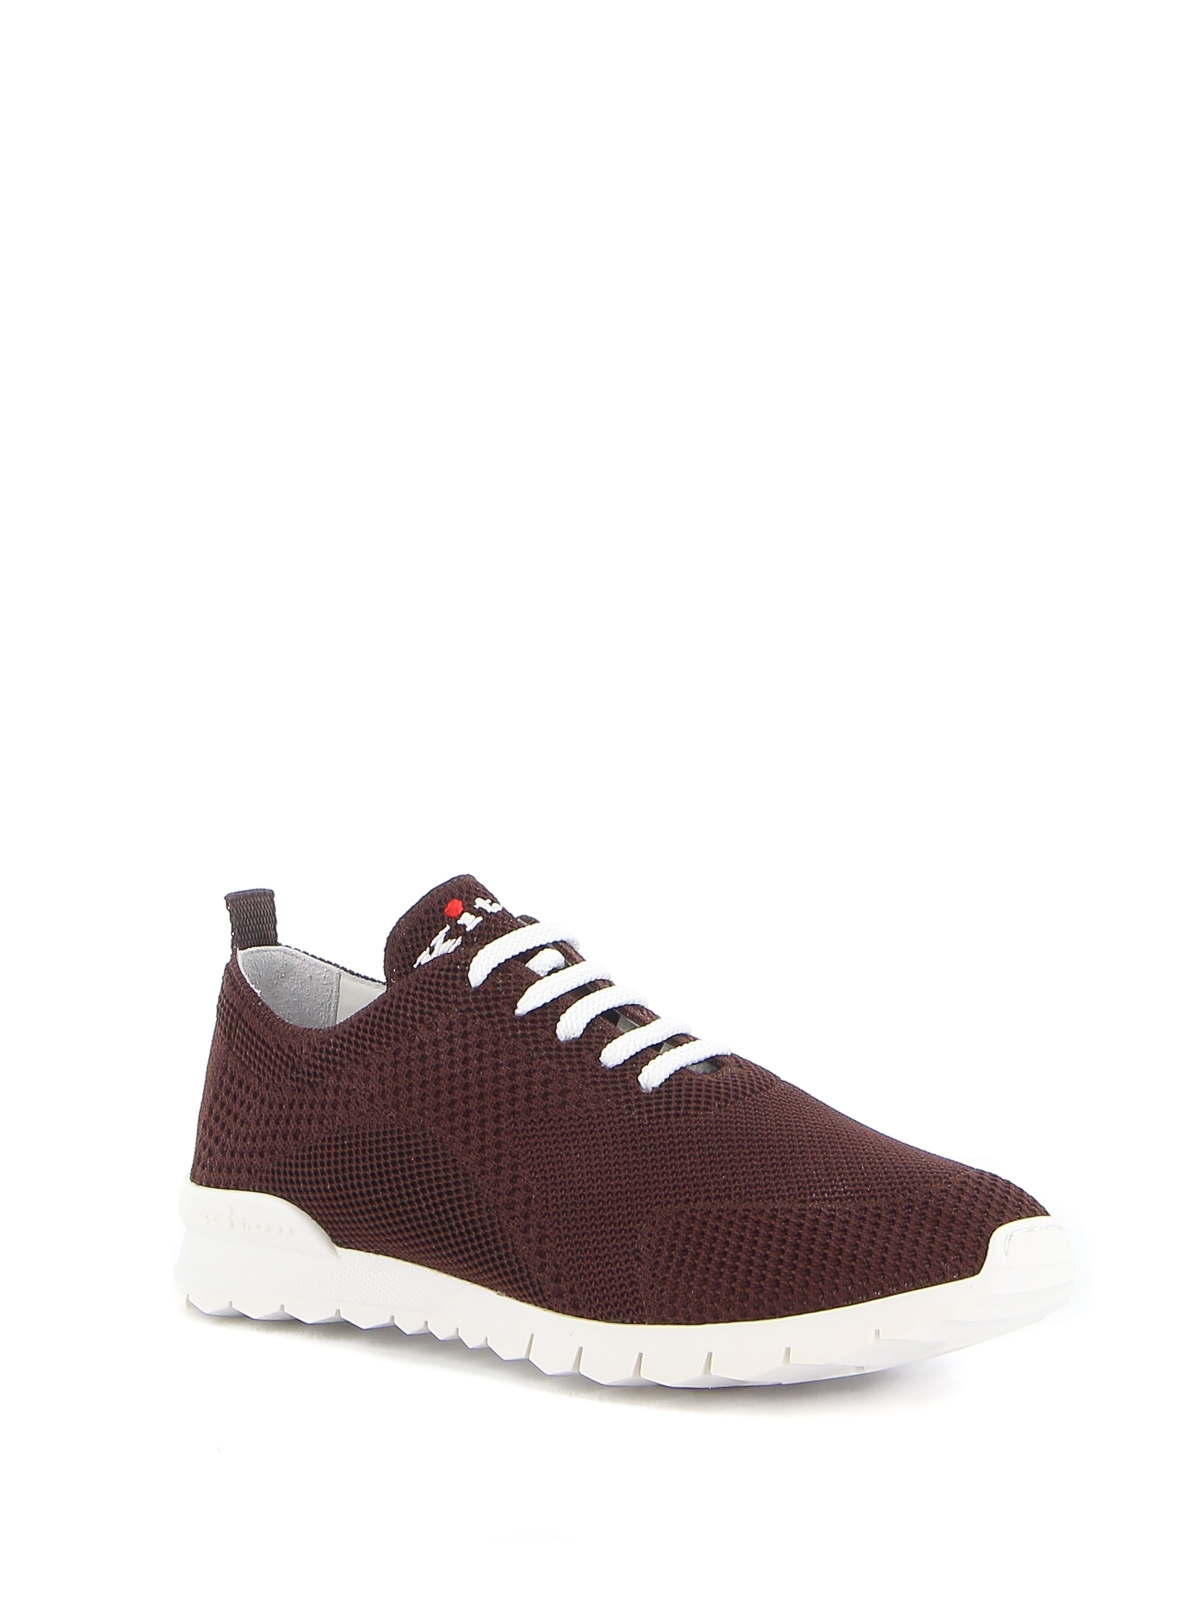 Kiton - Stretch knitted sneakers - trainers - USSFITSN008093000J